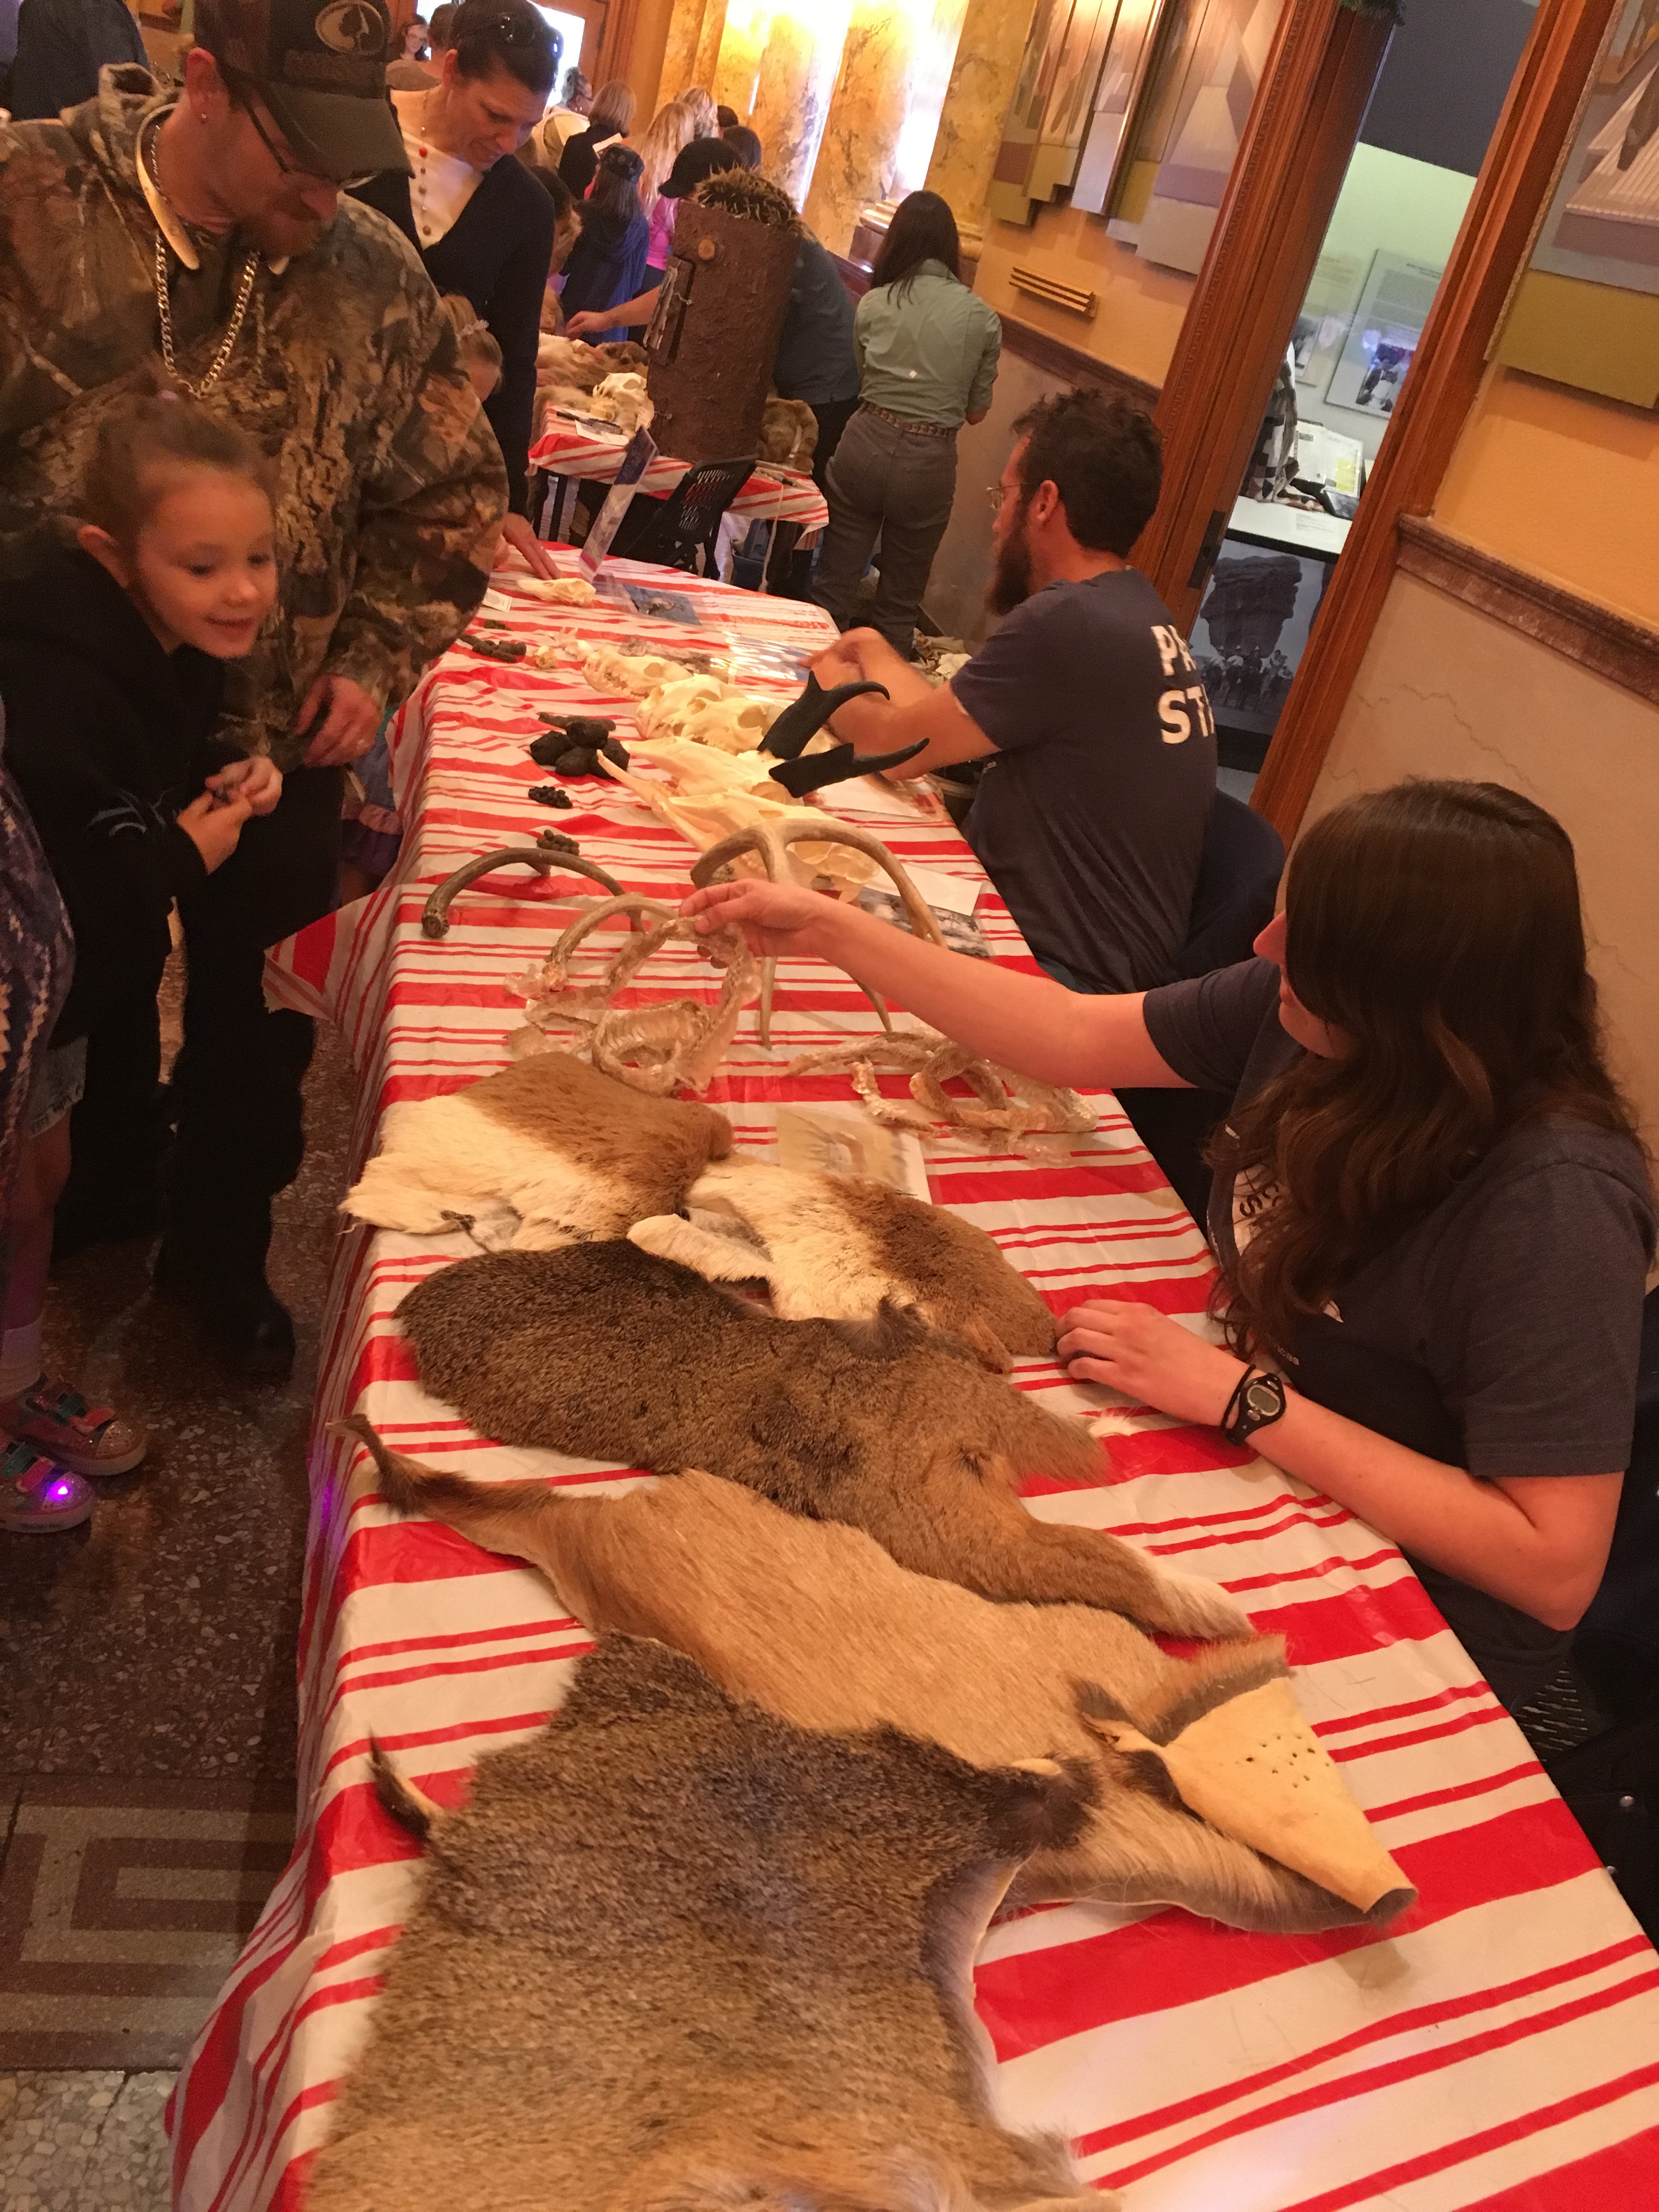 Children gathered around table laden with animal skins and skulls